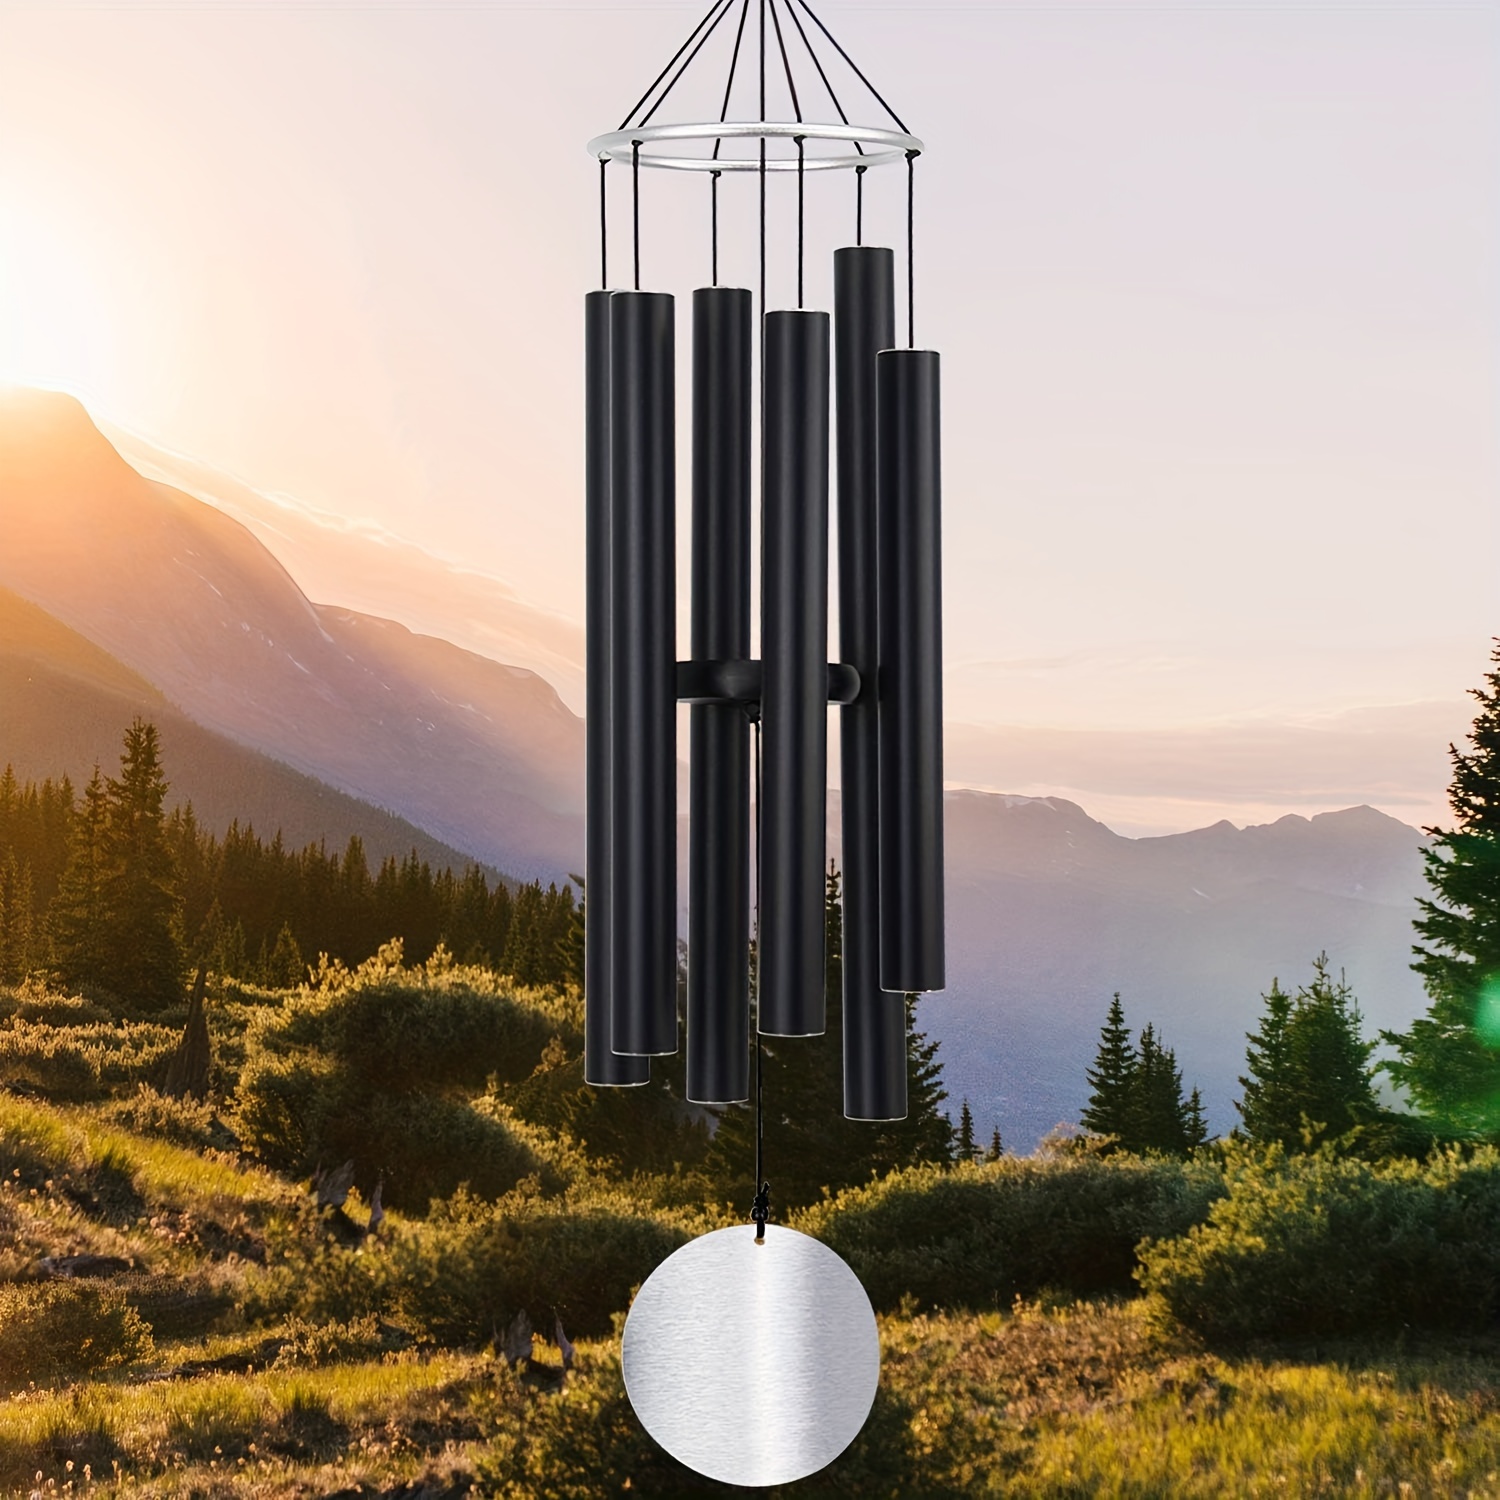 

32" Large Wind Chimes Deep Tone, Sympathy Wind Chimes Outdoor In E Key, Heavy Duty Plastic Material With Anodized Corrosion-resistant Finish And Durable Nylon Cording